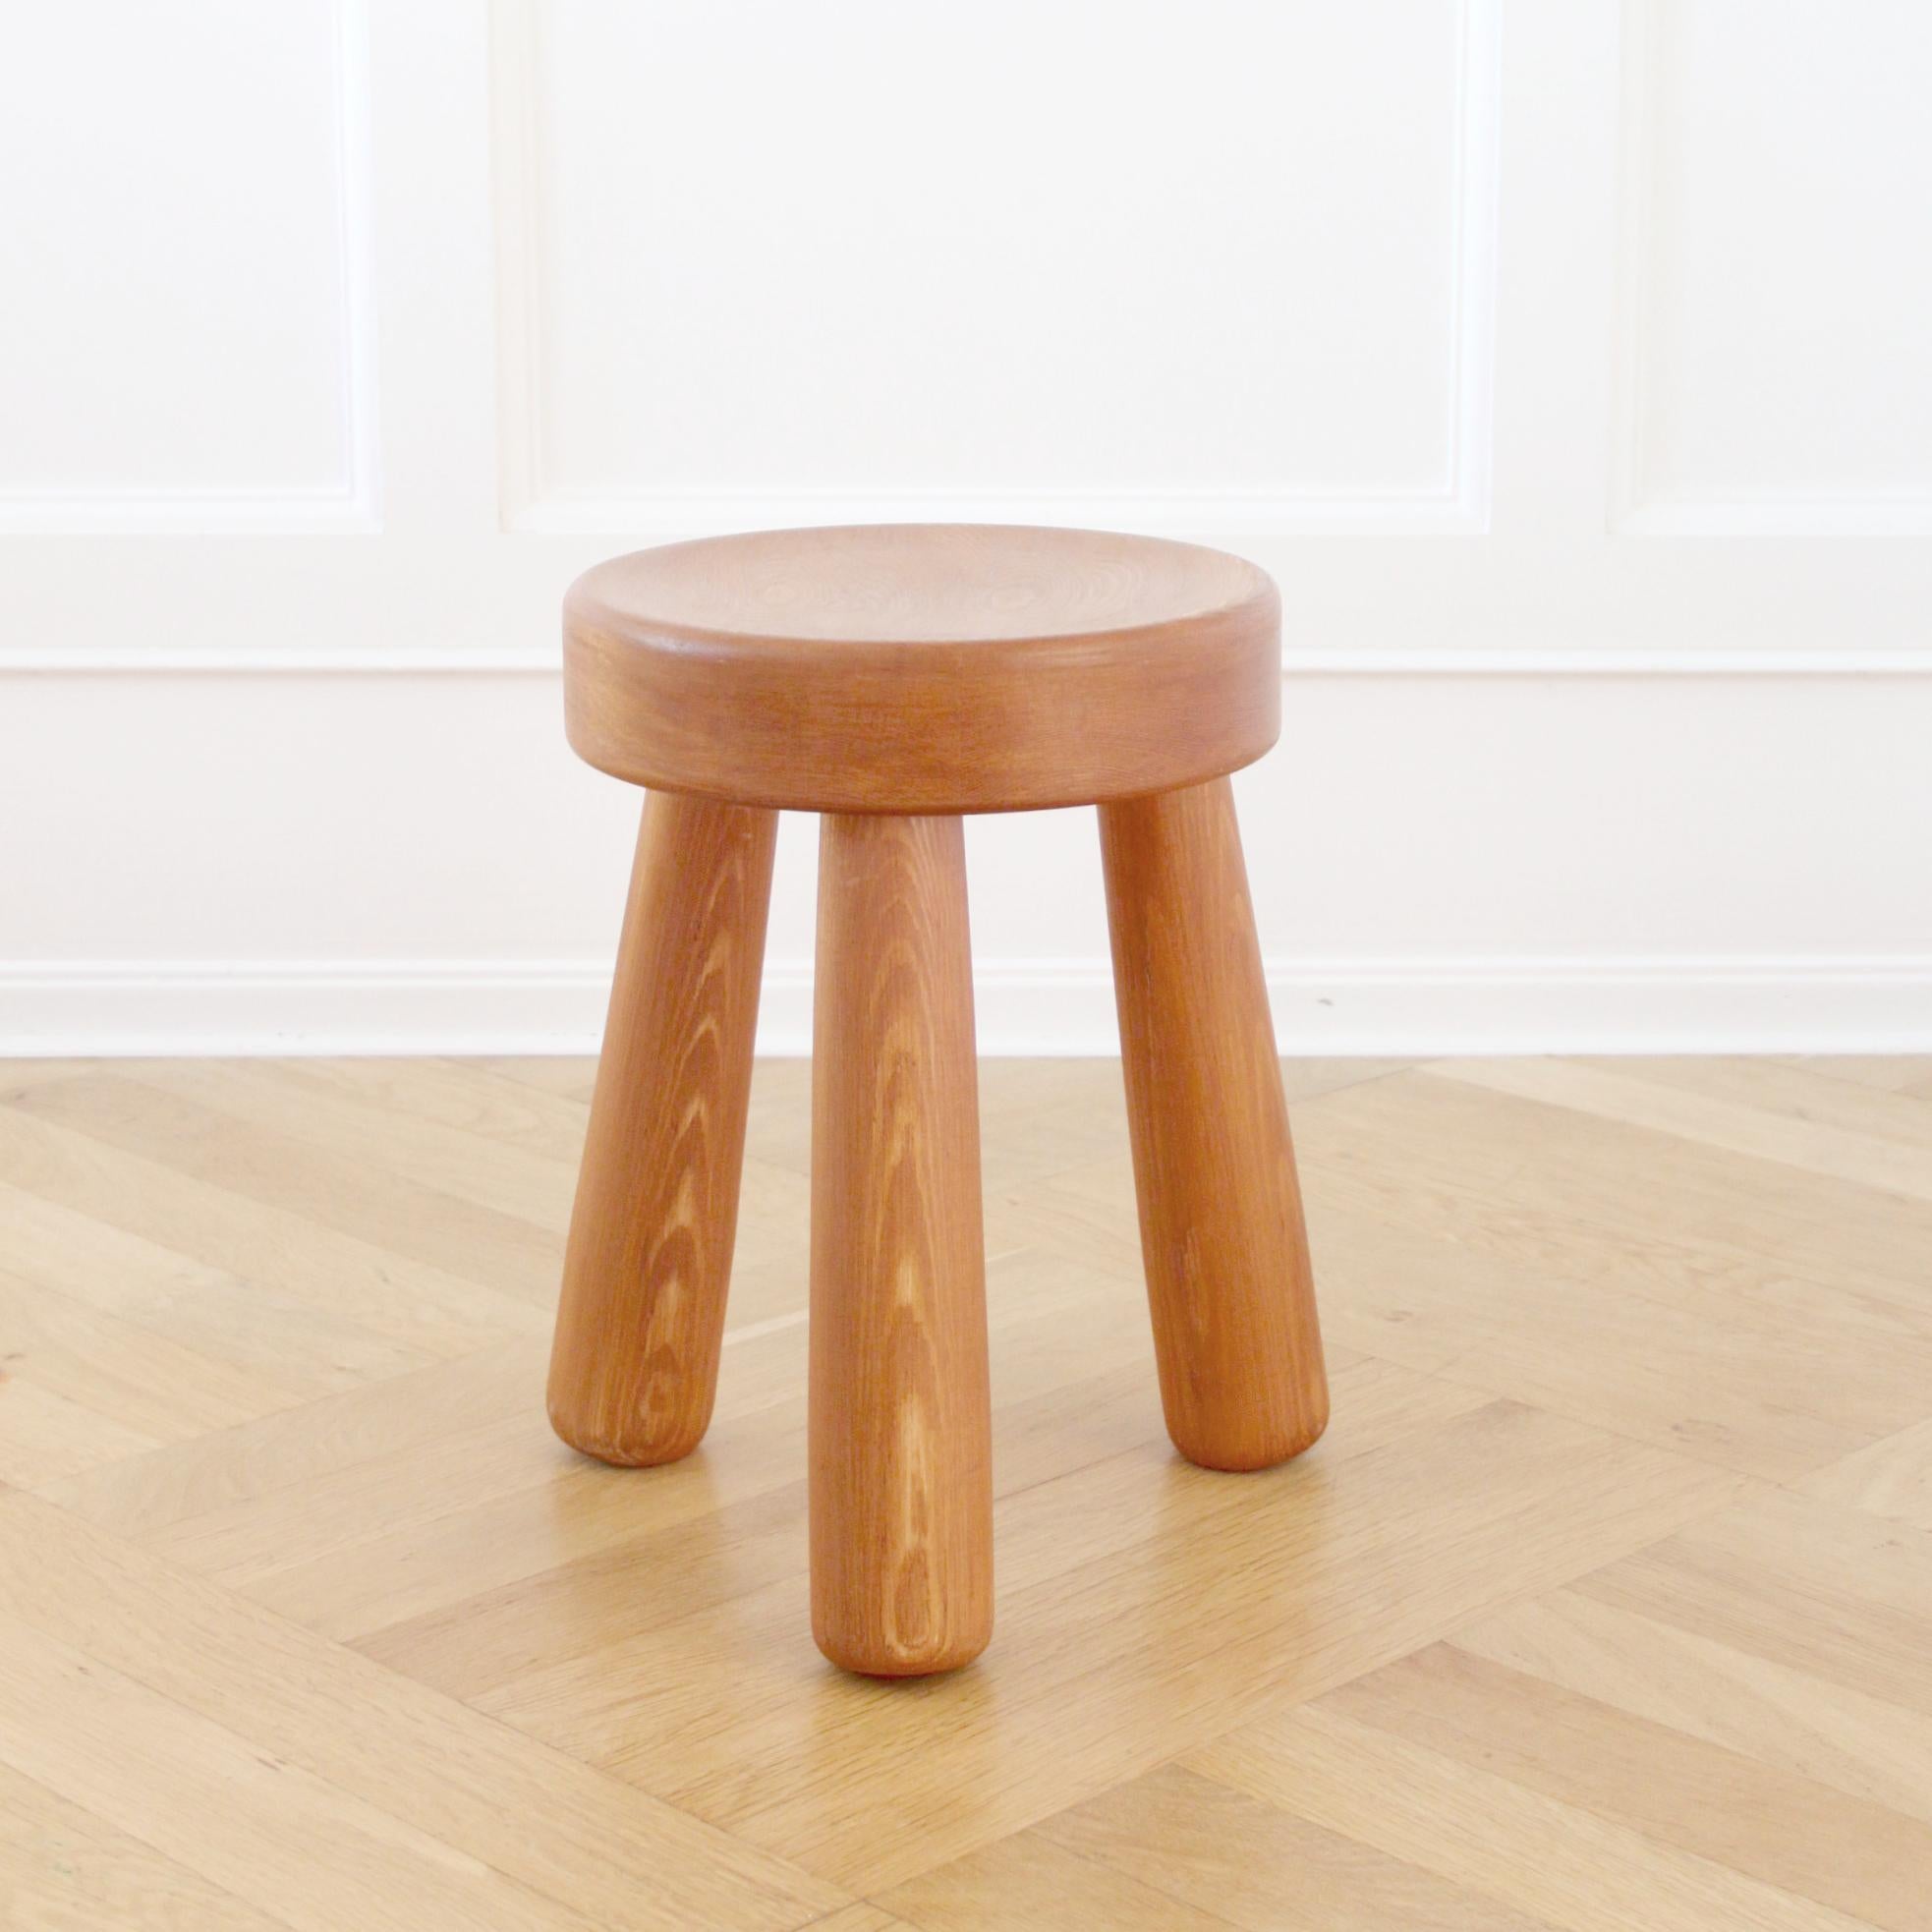 A beautiful, minimalistic tripod stool in stained solid pine, mid-century modern design, Sweden.

In the manner of the more famous Ingvar Hildingsson stools from the 1970s.

A beautiful attribution to both modern and classic interios. 

Free